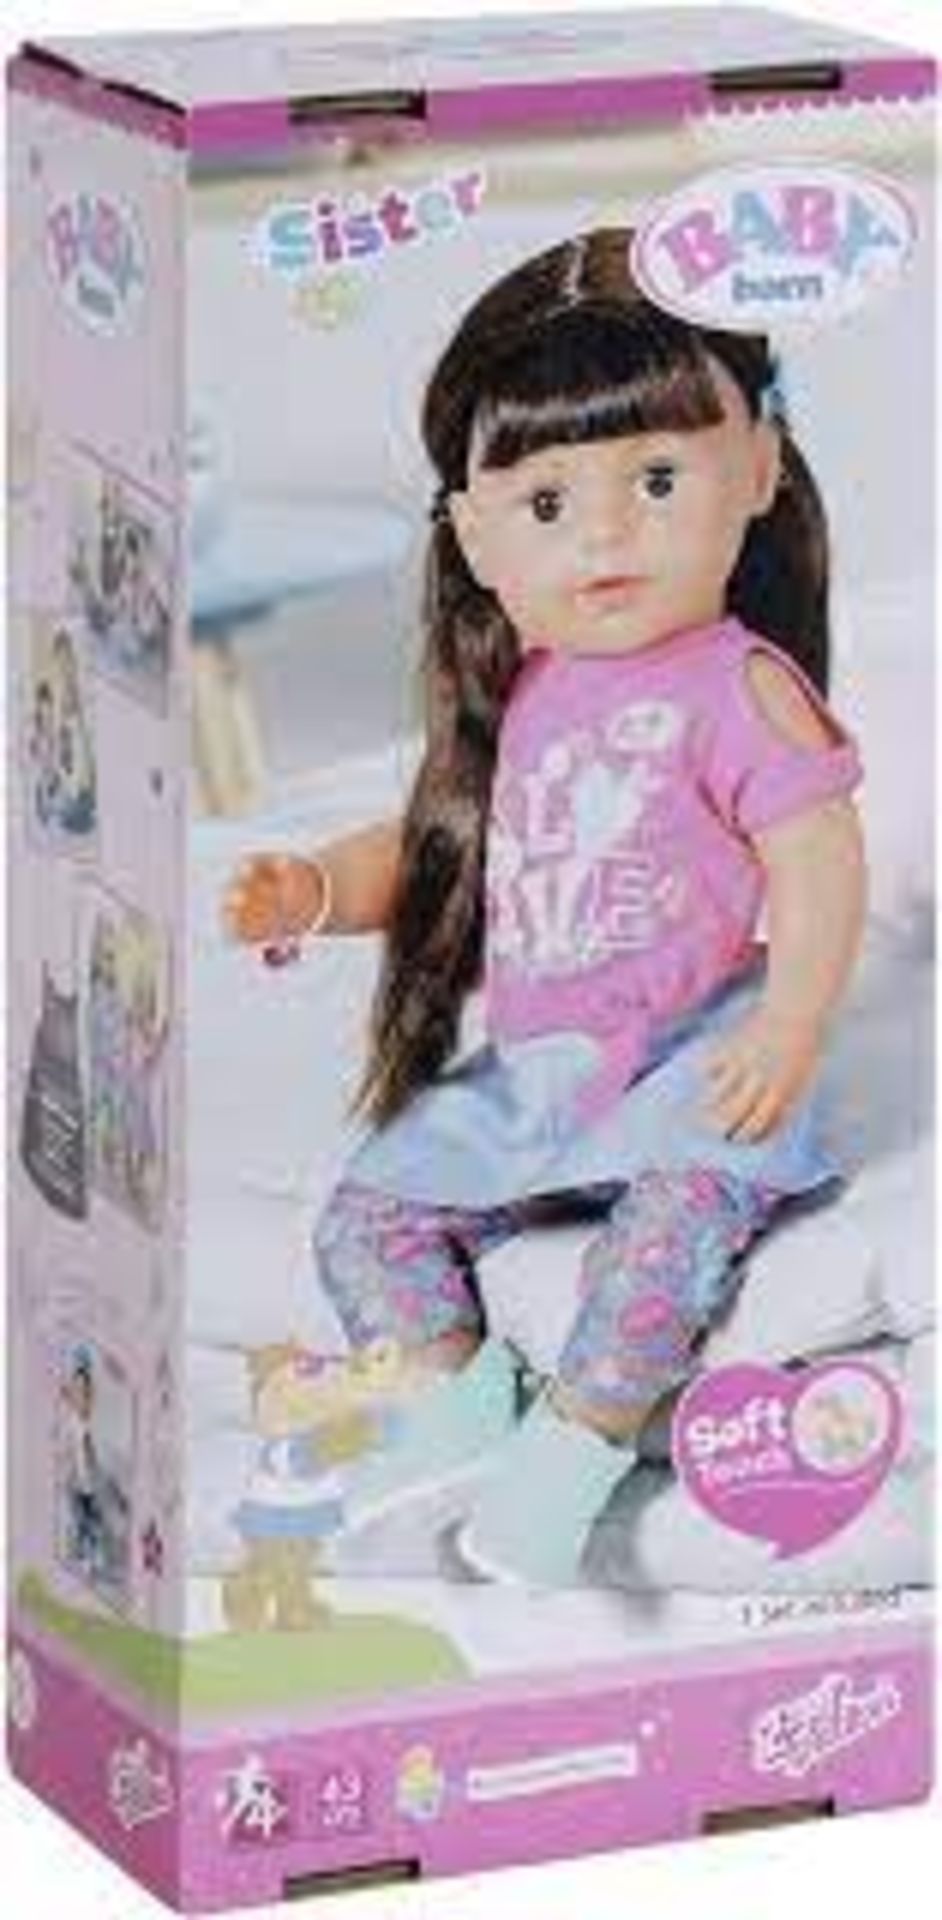 630 X BRAND NEW PIECES OF BRANDED TOYS INCLUDING LOL SURPRISE DOLL SERIES, DESIGN A FRIEND SLEEPOVER - Image 10 of 17